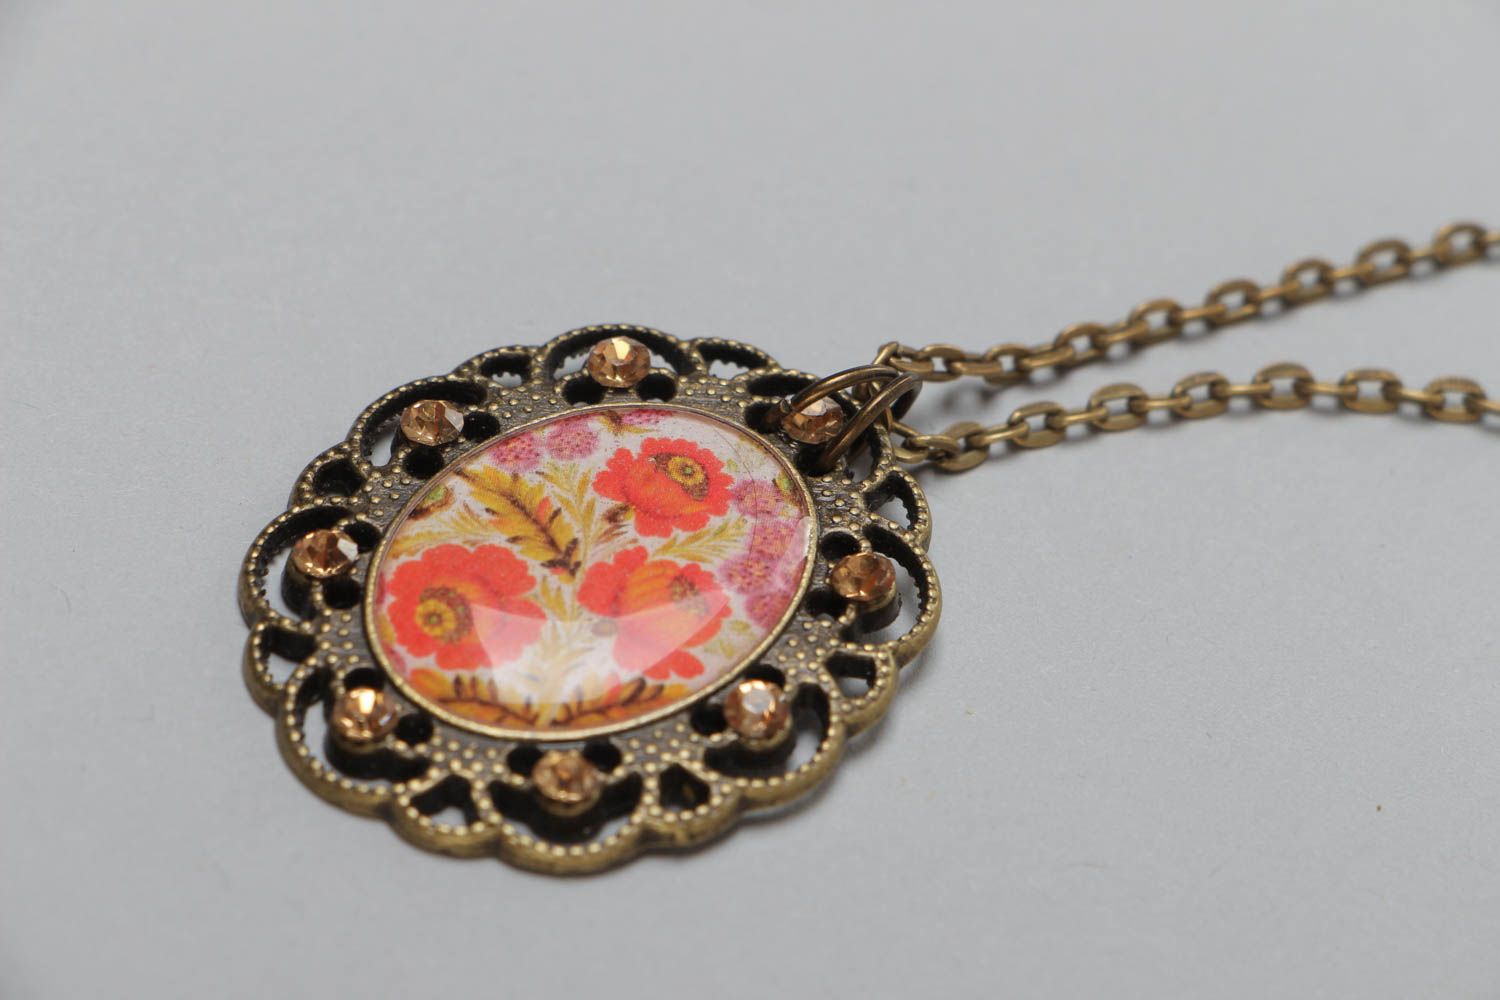 Handmade vintage metal pendant with floral image and glass glaze on chain 700 mm photo 3